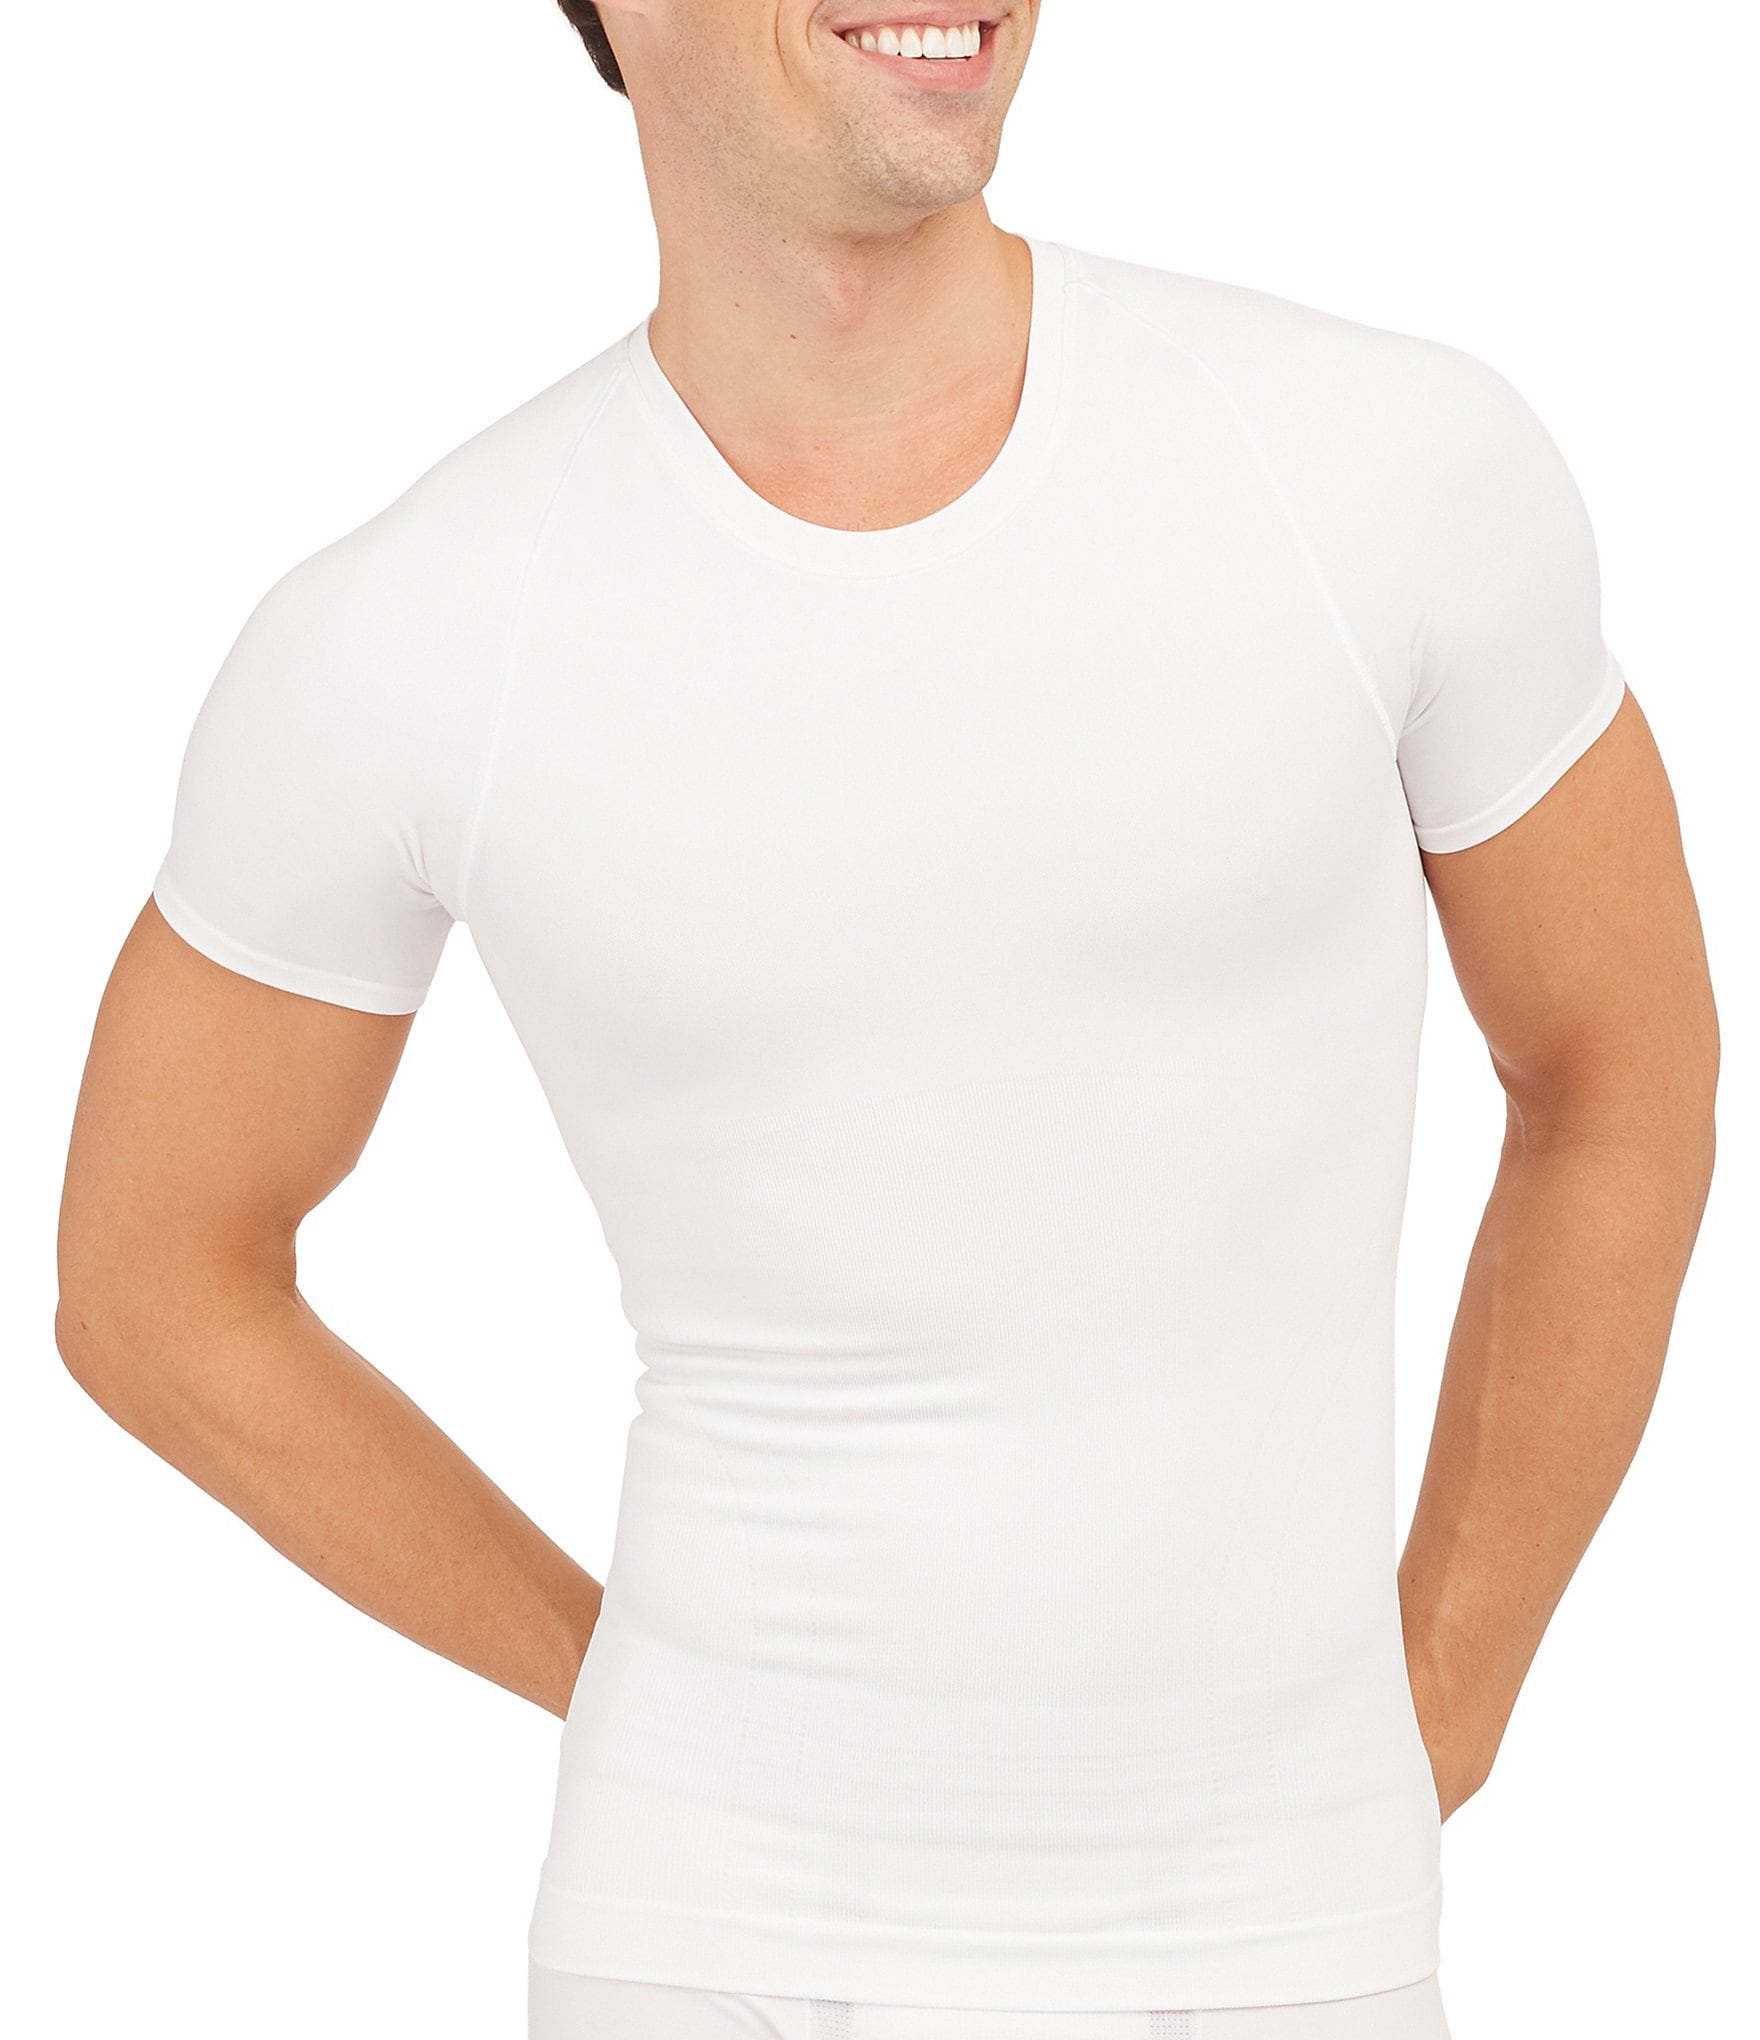 SPANX for Men Cotton Modal Crew T-Shirt - Breathable Fabric with